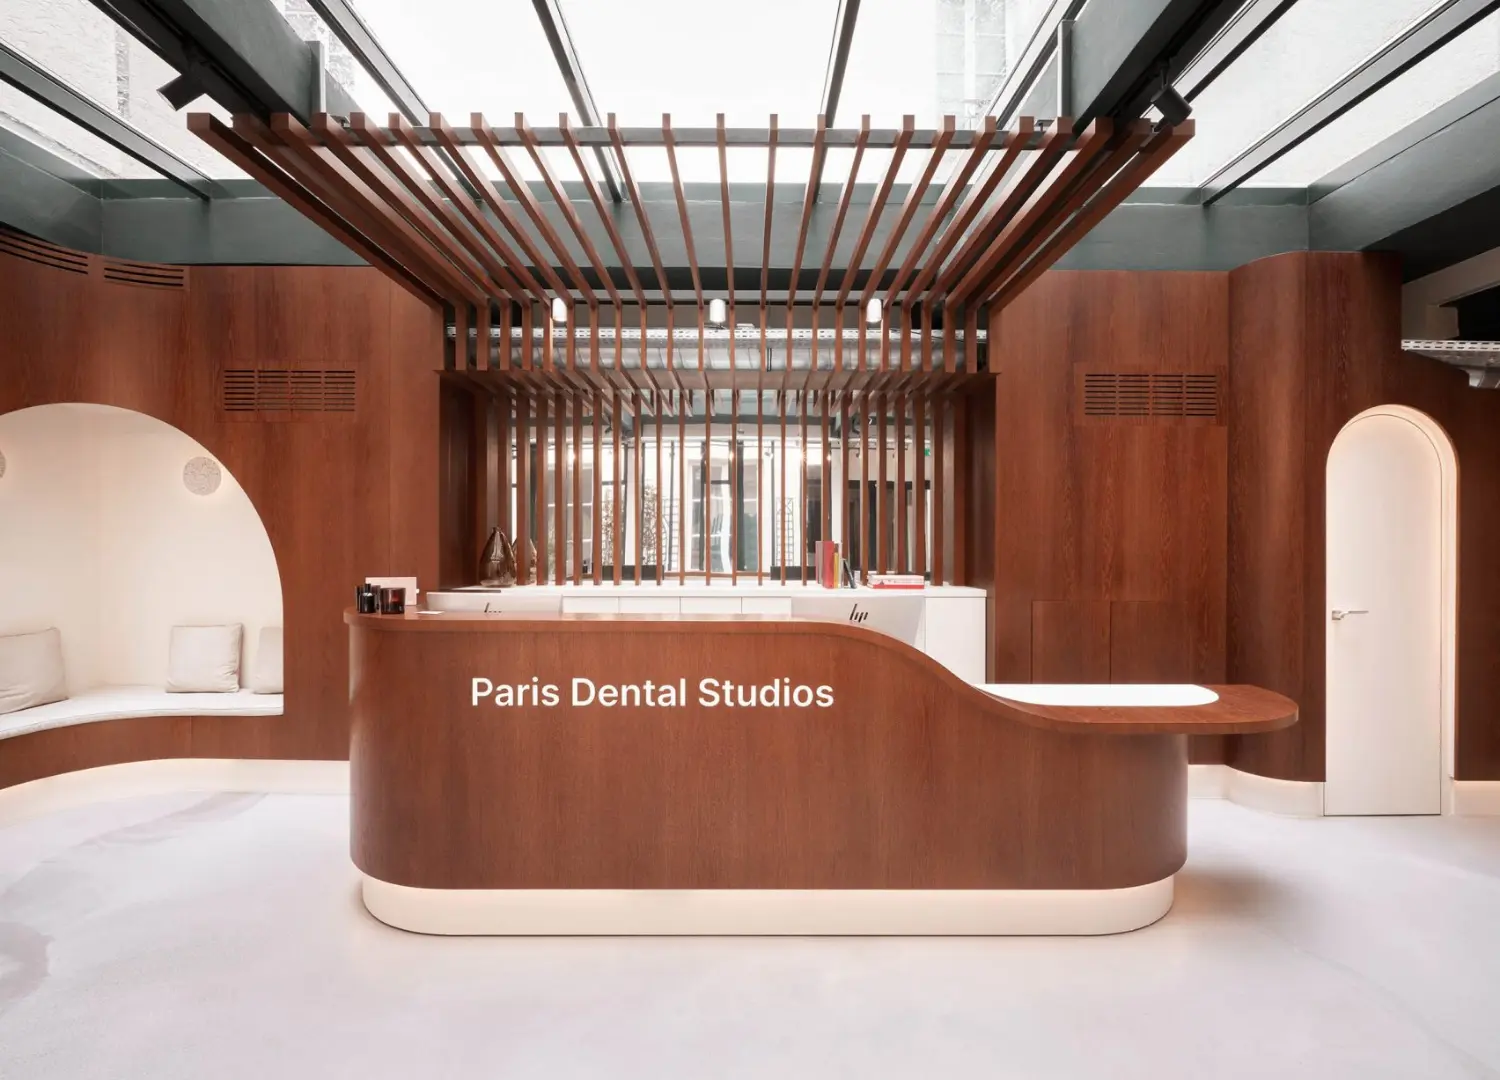 JCPCDR Architecture for Paris Dental Studios / Nothing like your ordinary dental clinics - step inside these 5 spaces